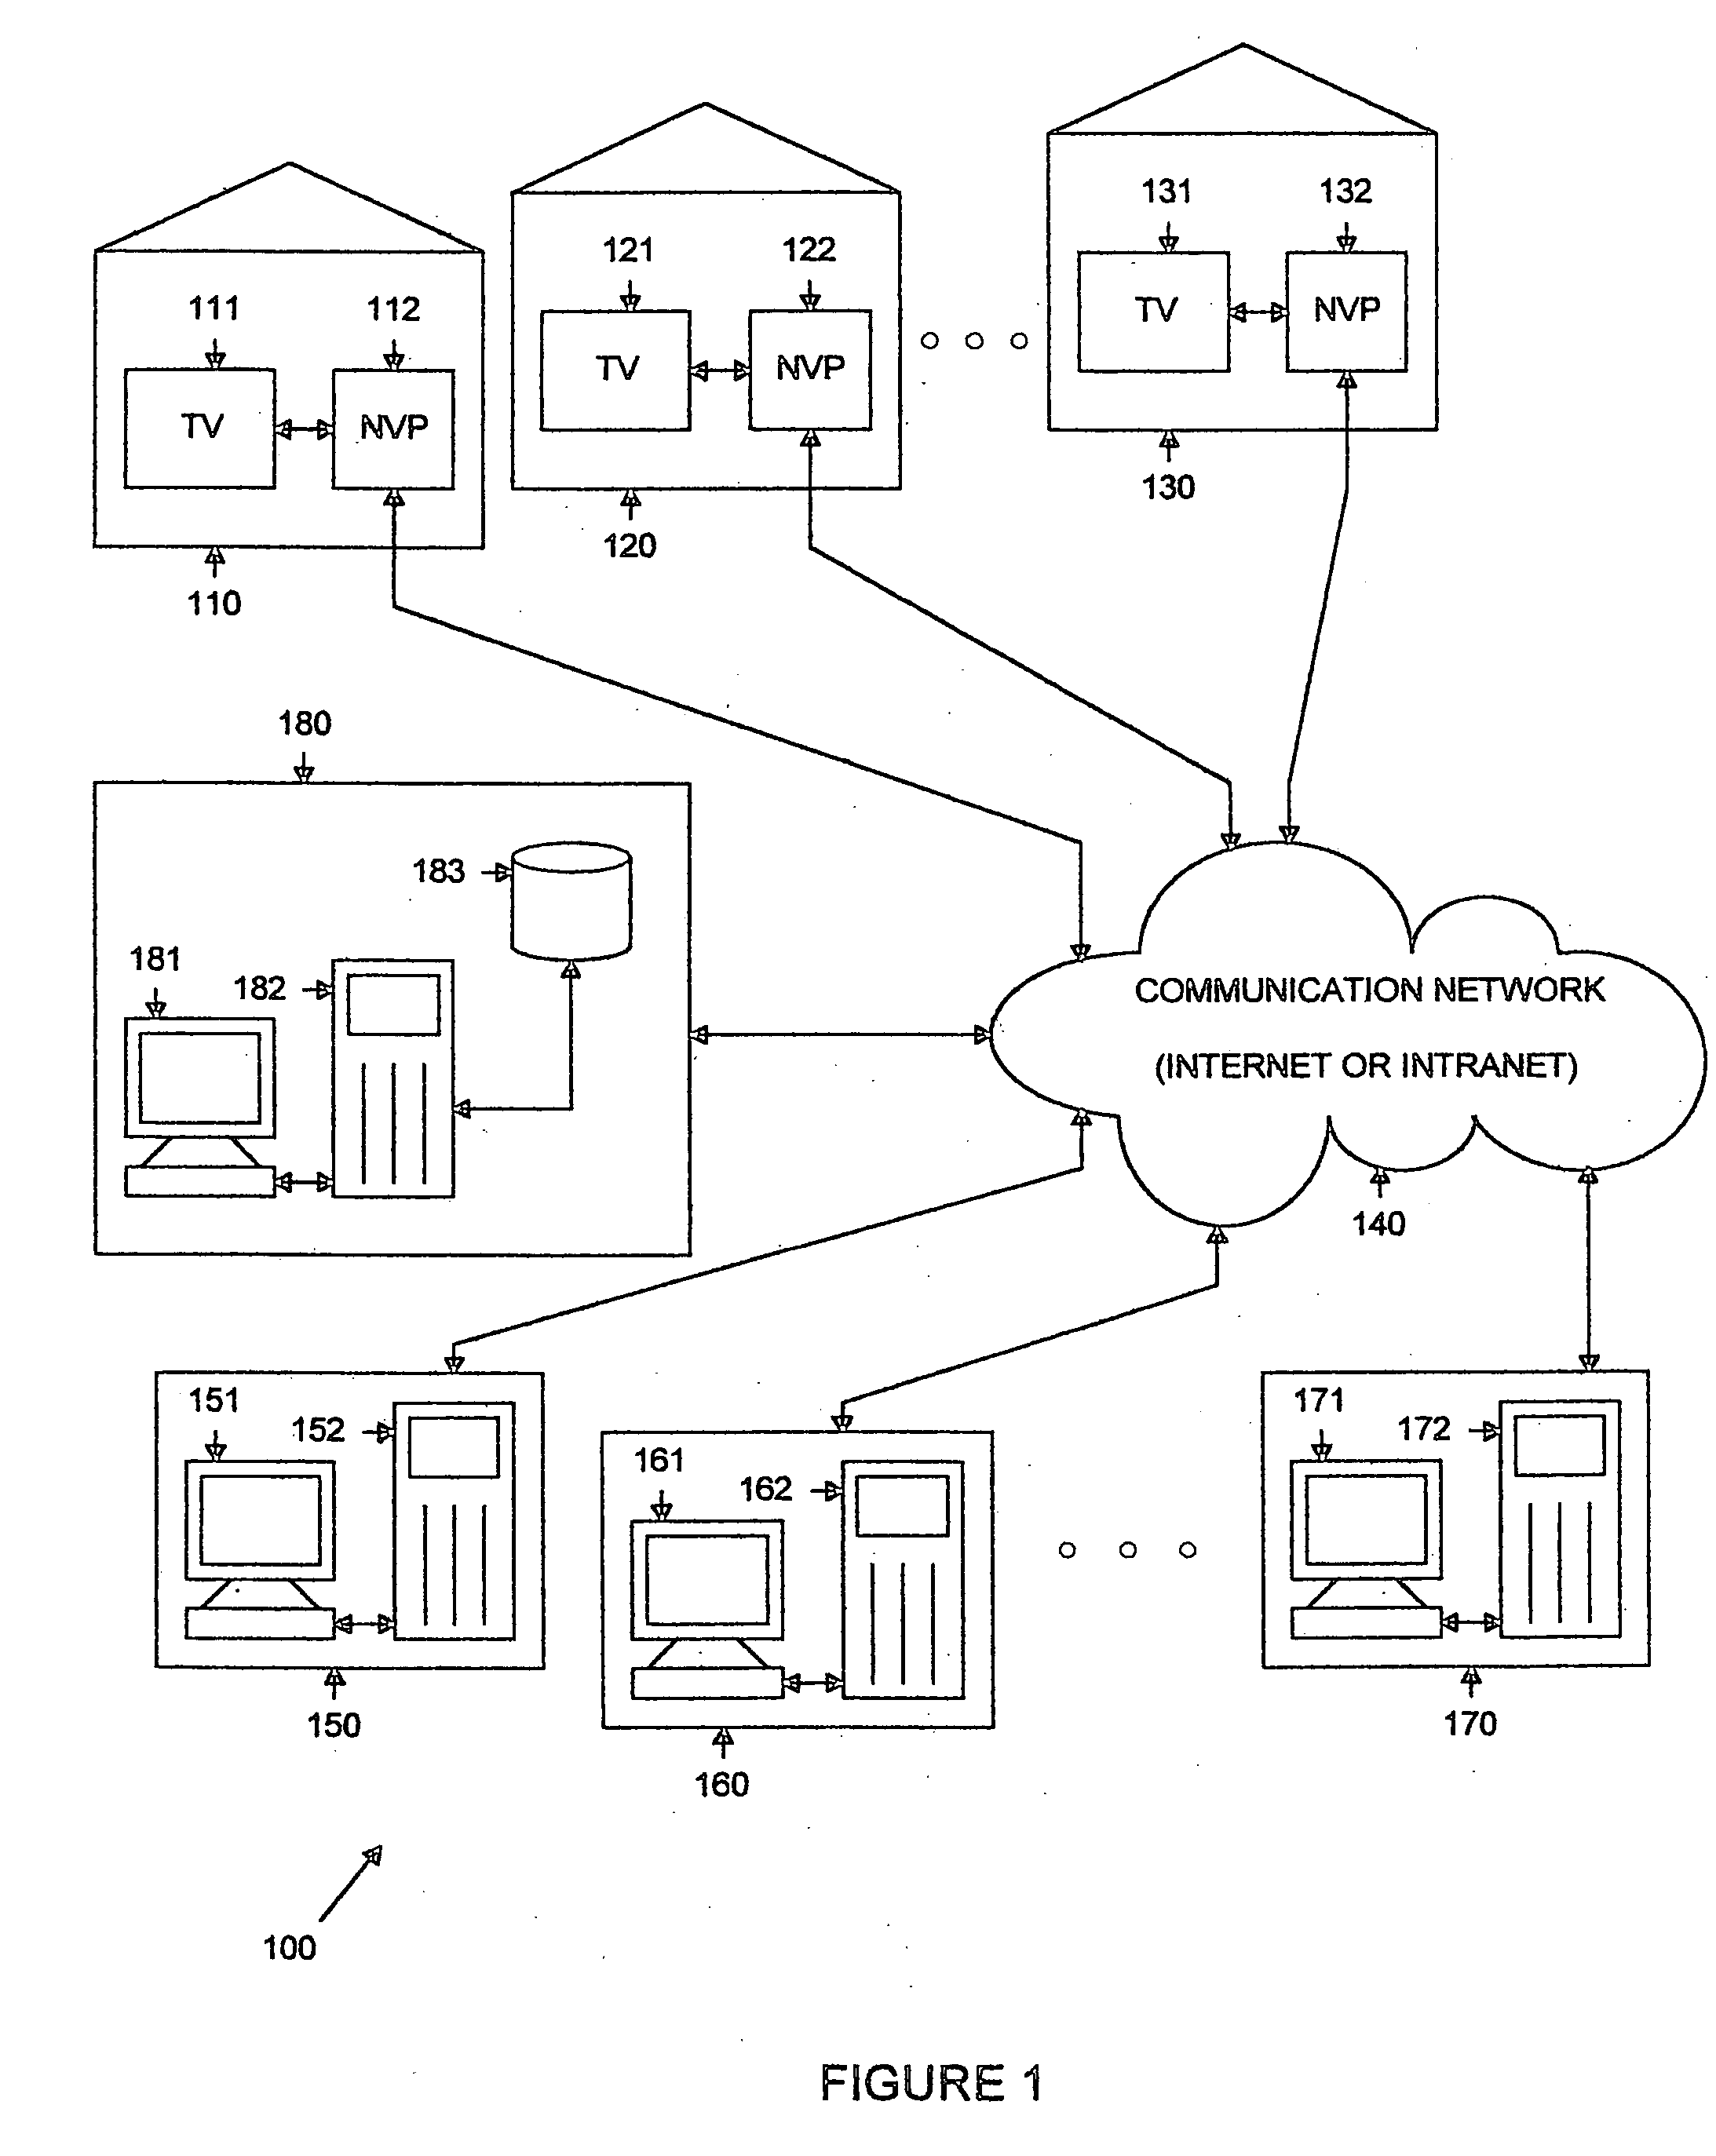 Set-top box for internet-based distribution of video and other data